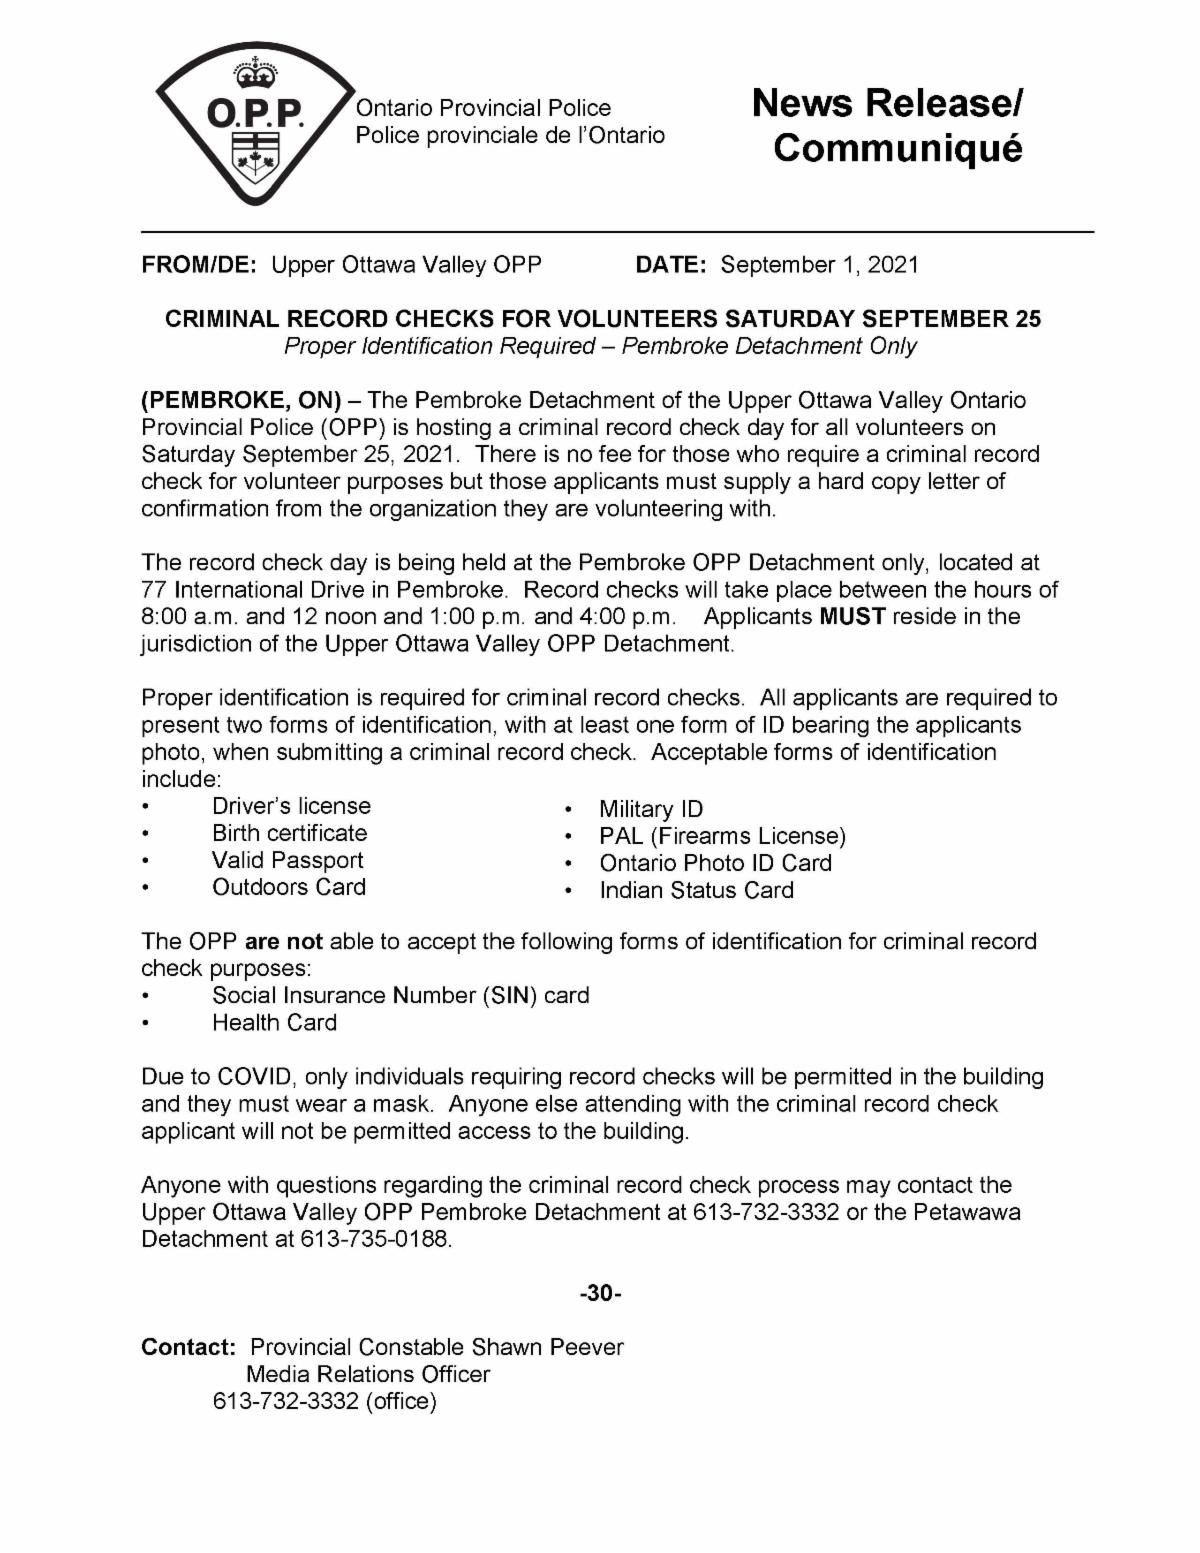 OPP, criminal record check for volunteers, UOVOPP